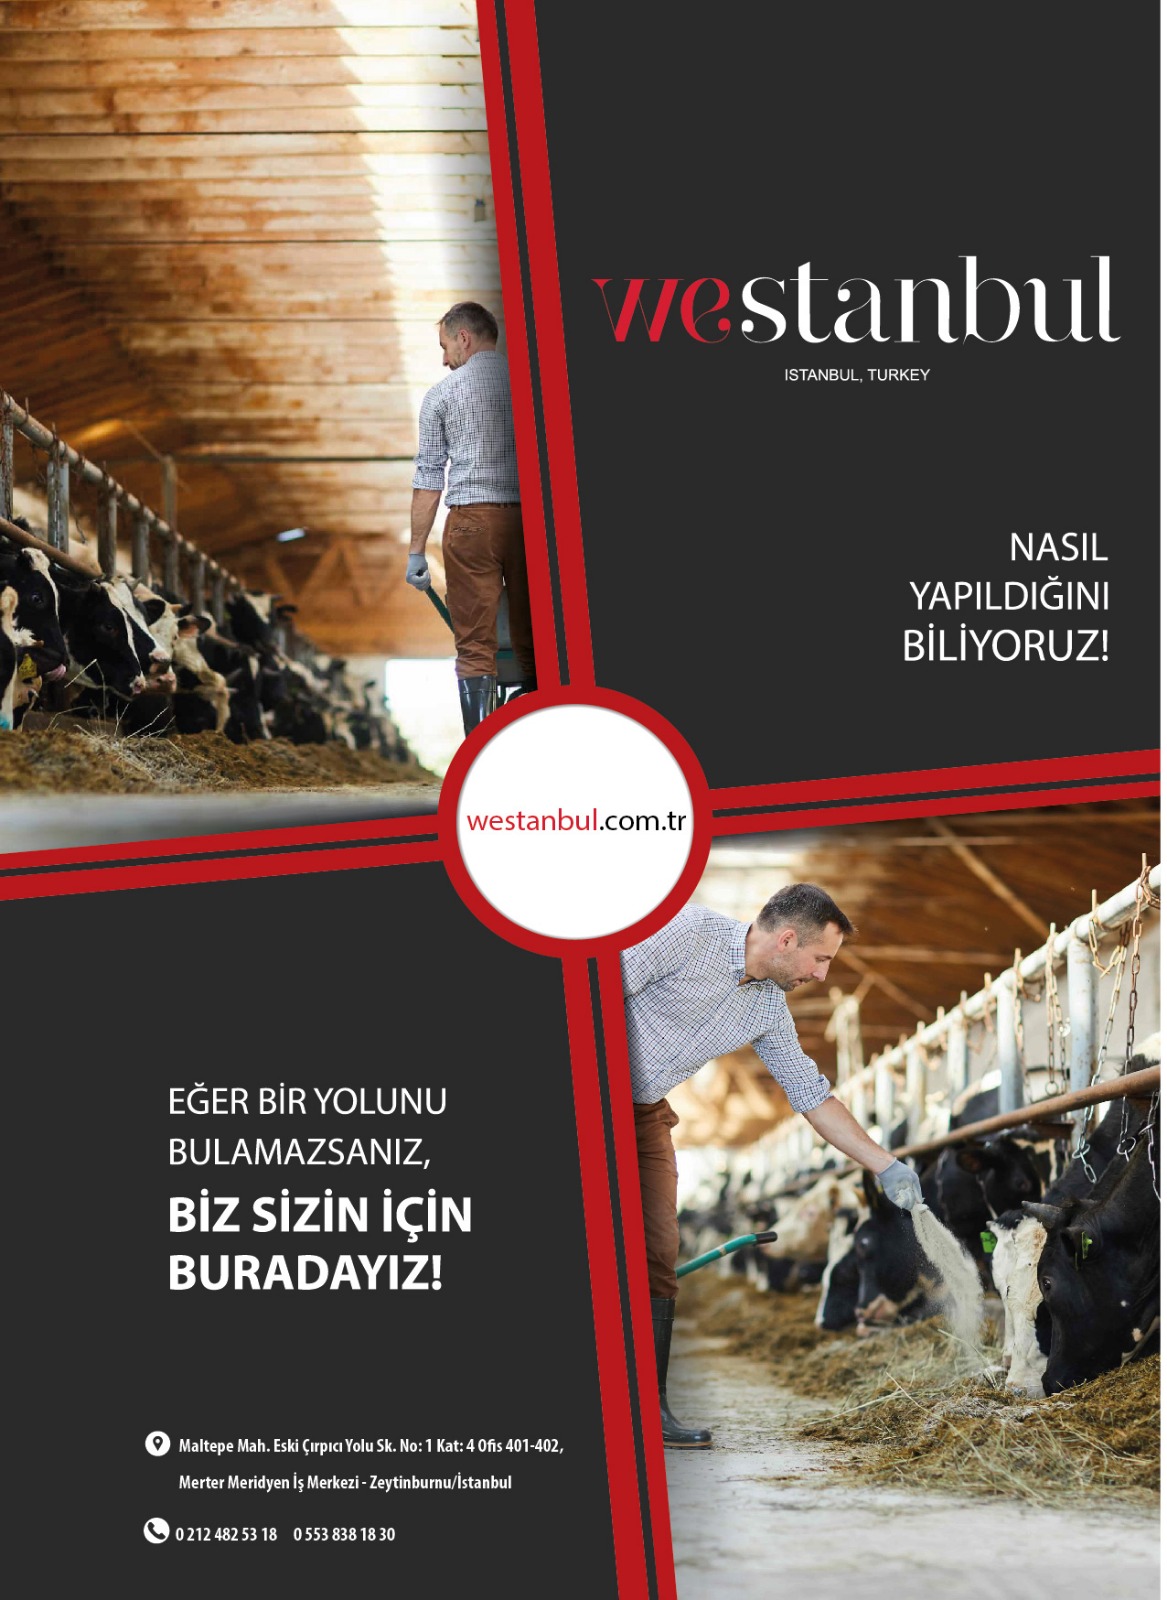 With Westanbul Add New Value to Your Organization